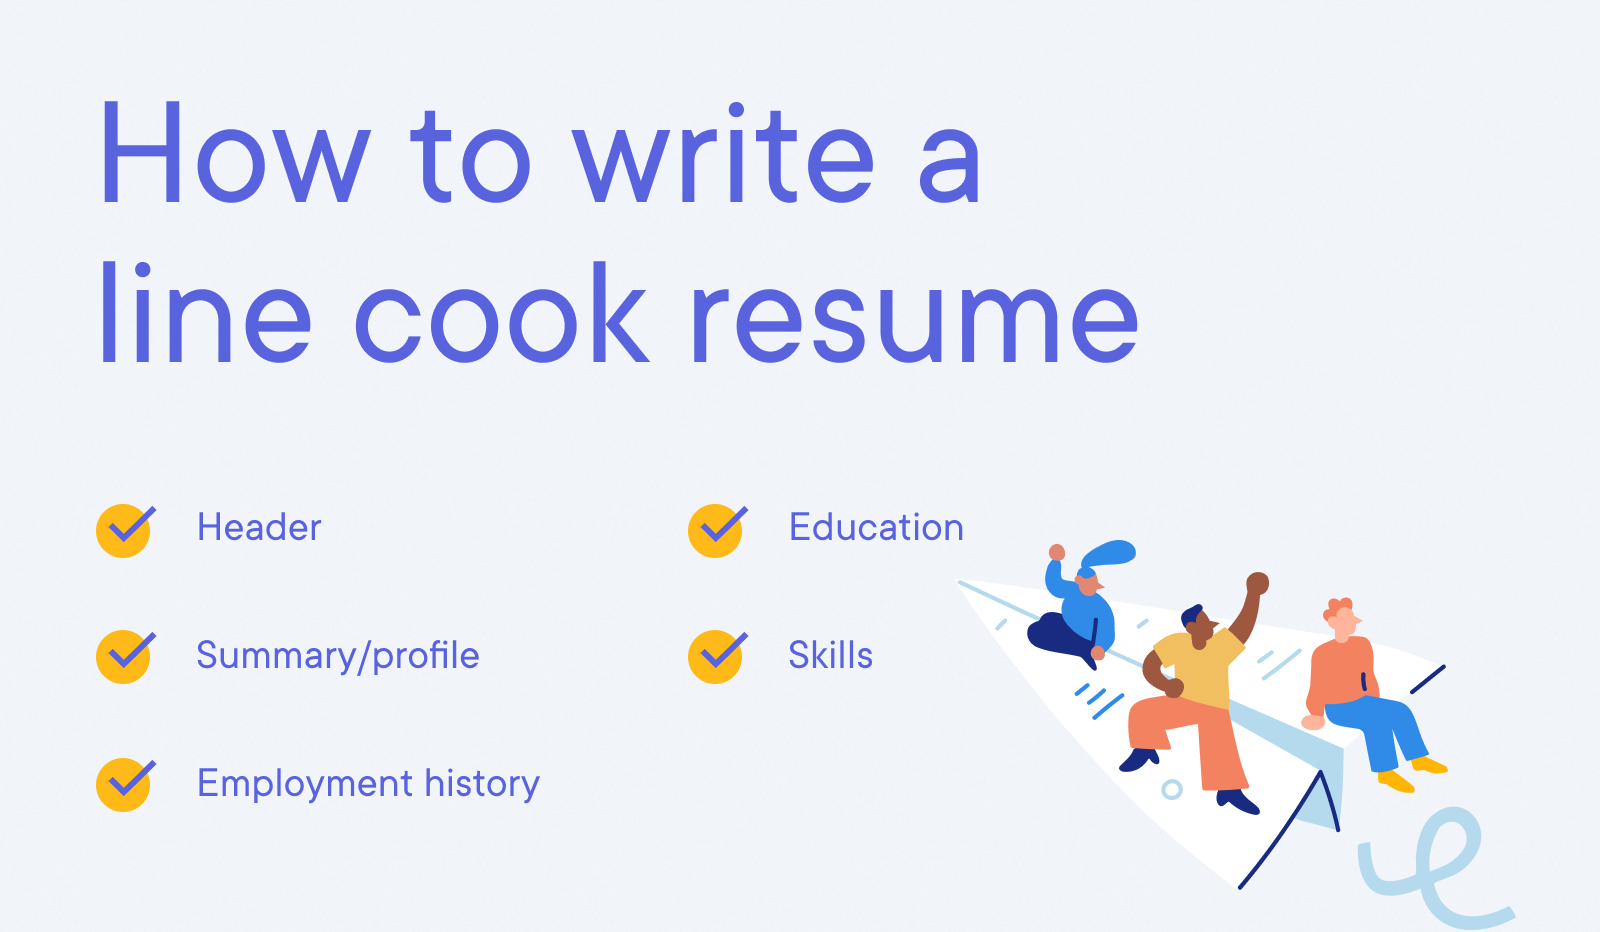 Line Cook - How to write a line cook resume